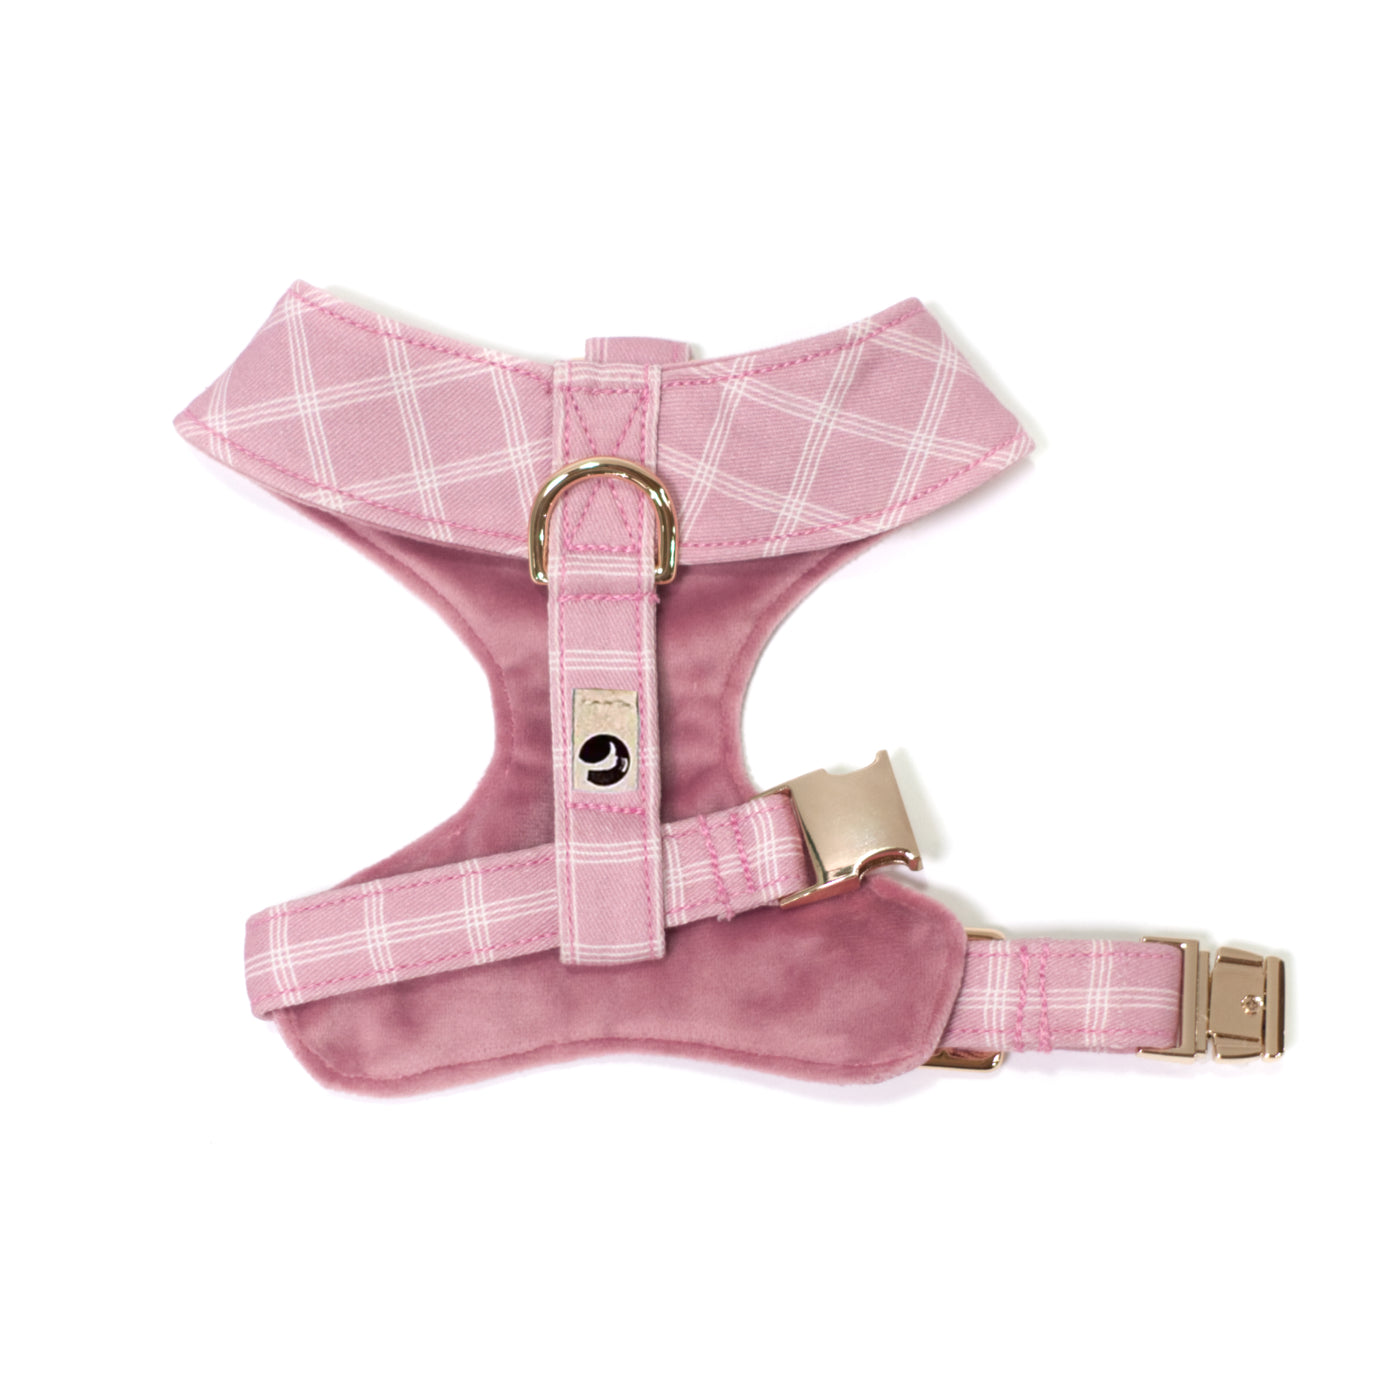 Pink plaid and velvet reversible dog harness with gold hardware shown from back/top